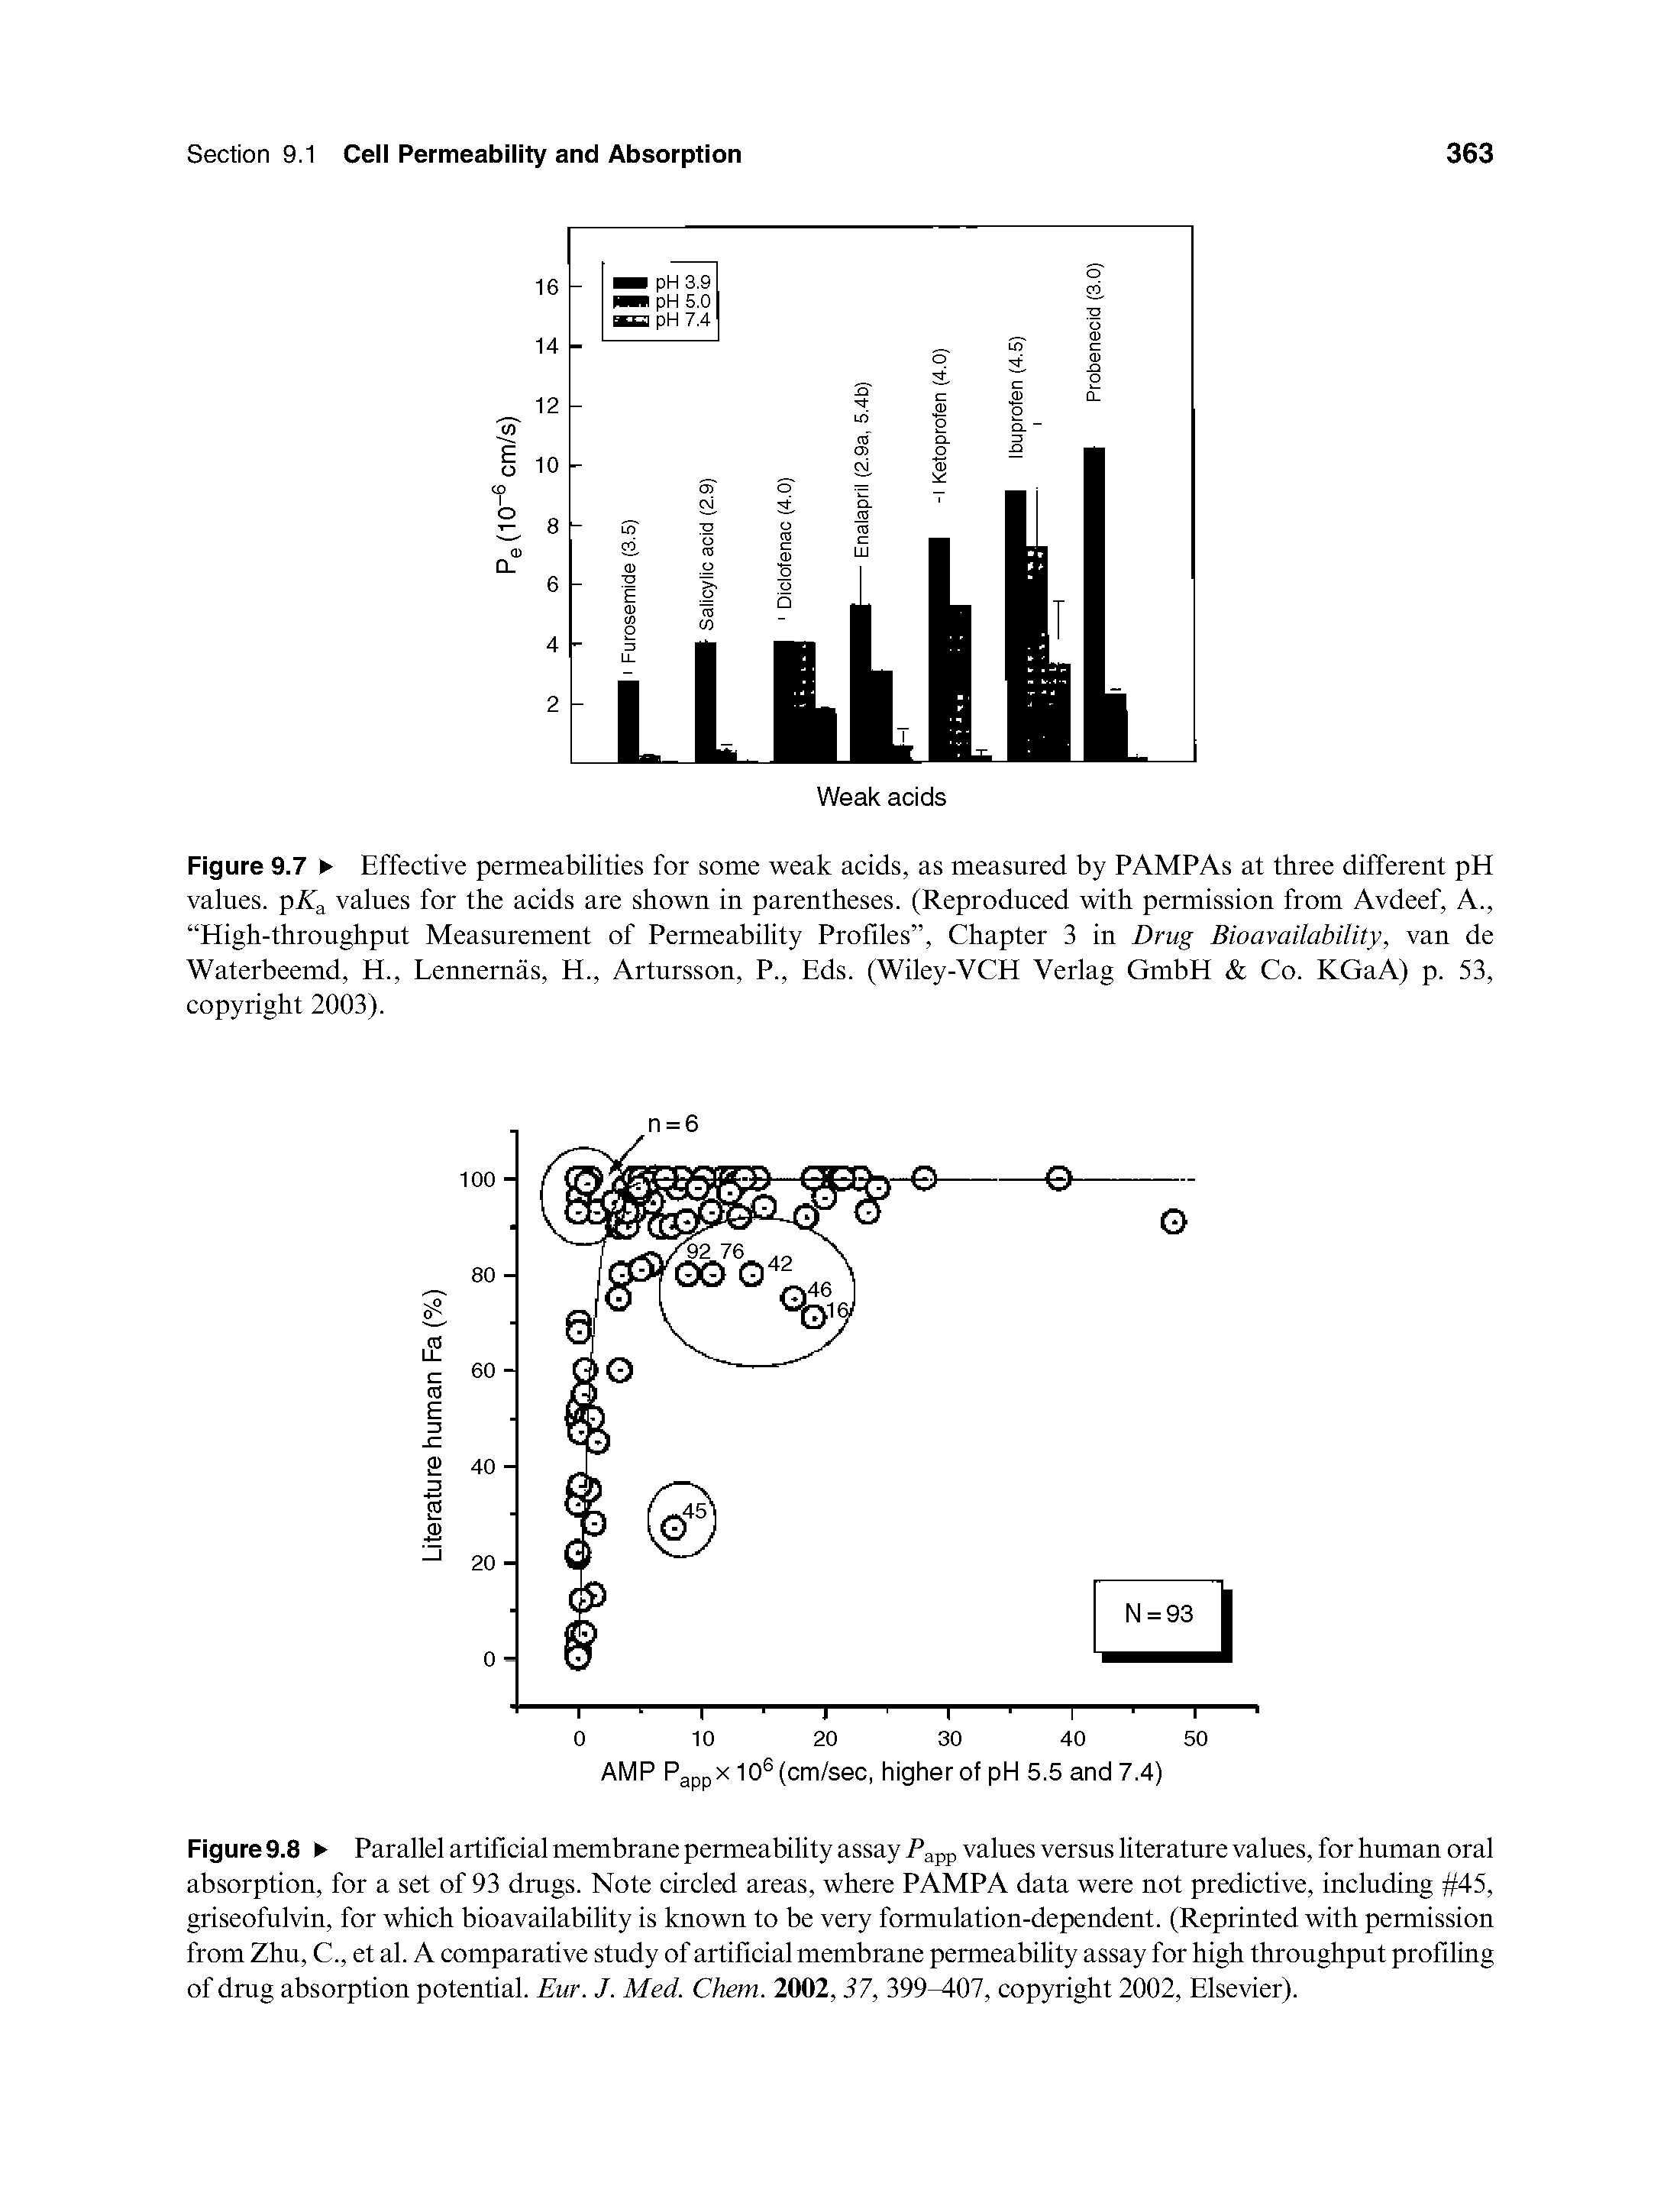 Figure 9.8 Parallel artificial membrane permeability assay Papp values versus literature values, for human oral absorption, for a set of 93 drugs. Note circled areas, where PAMPA data were not predictive, including 45, griseofulvin, for which bioavailability is known to be very formulation-dependent. (Reprinted with permission from Zhu, C., et al. A comparative study of artificial membrane permeability assay for high throughput profiling of drug absorption potential. Eur. J. Med. Chem. 2002, 37, 399 07, copyright 2002, Elsevier).